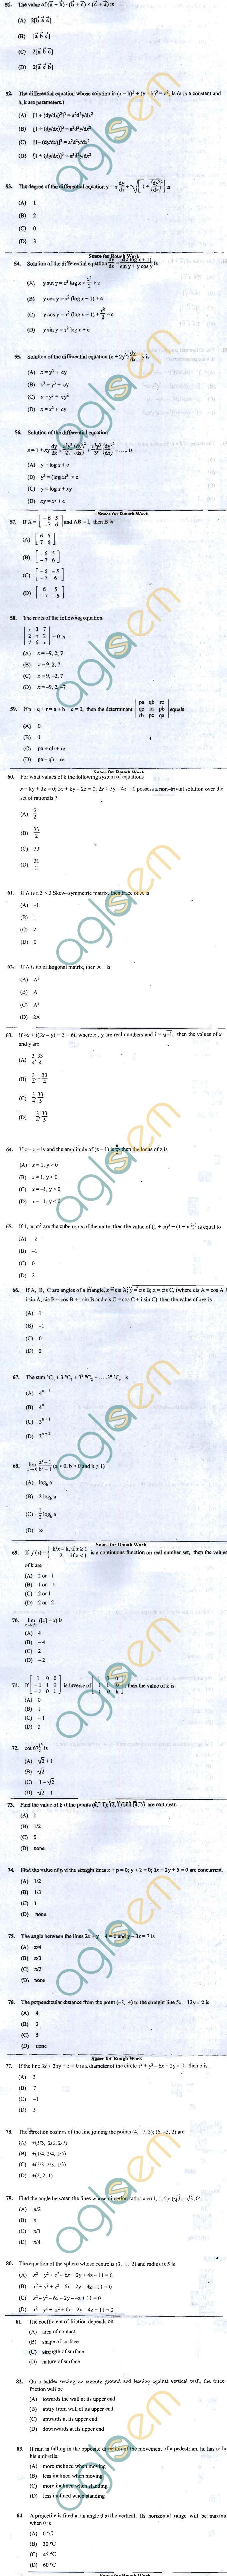 OJEE 2013 Question Paper for LE TECH